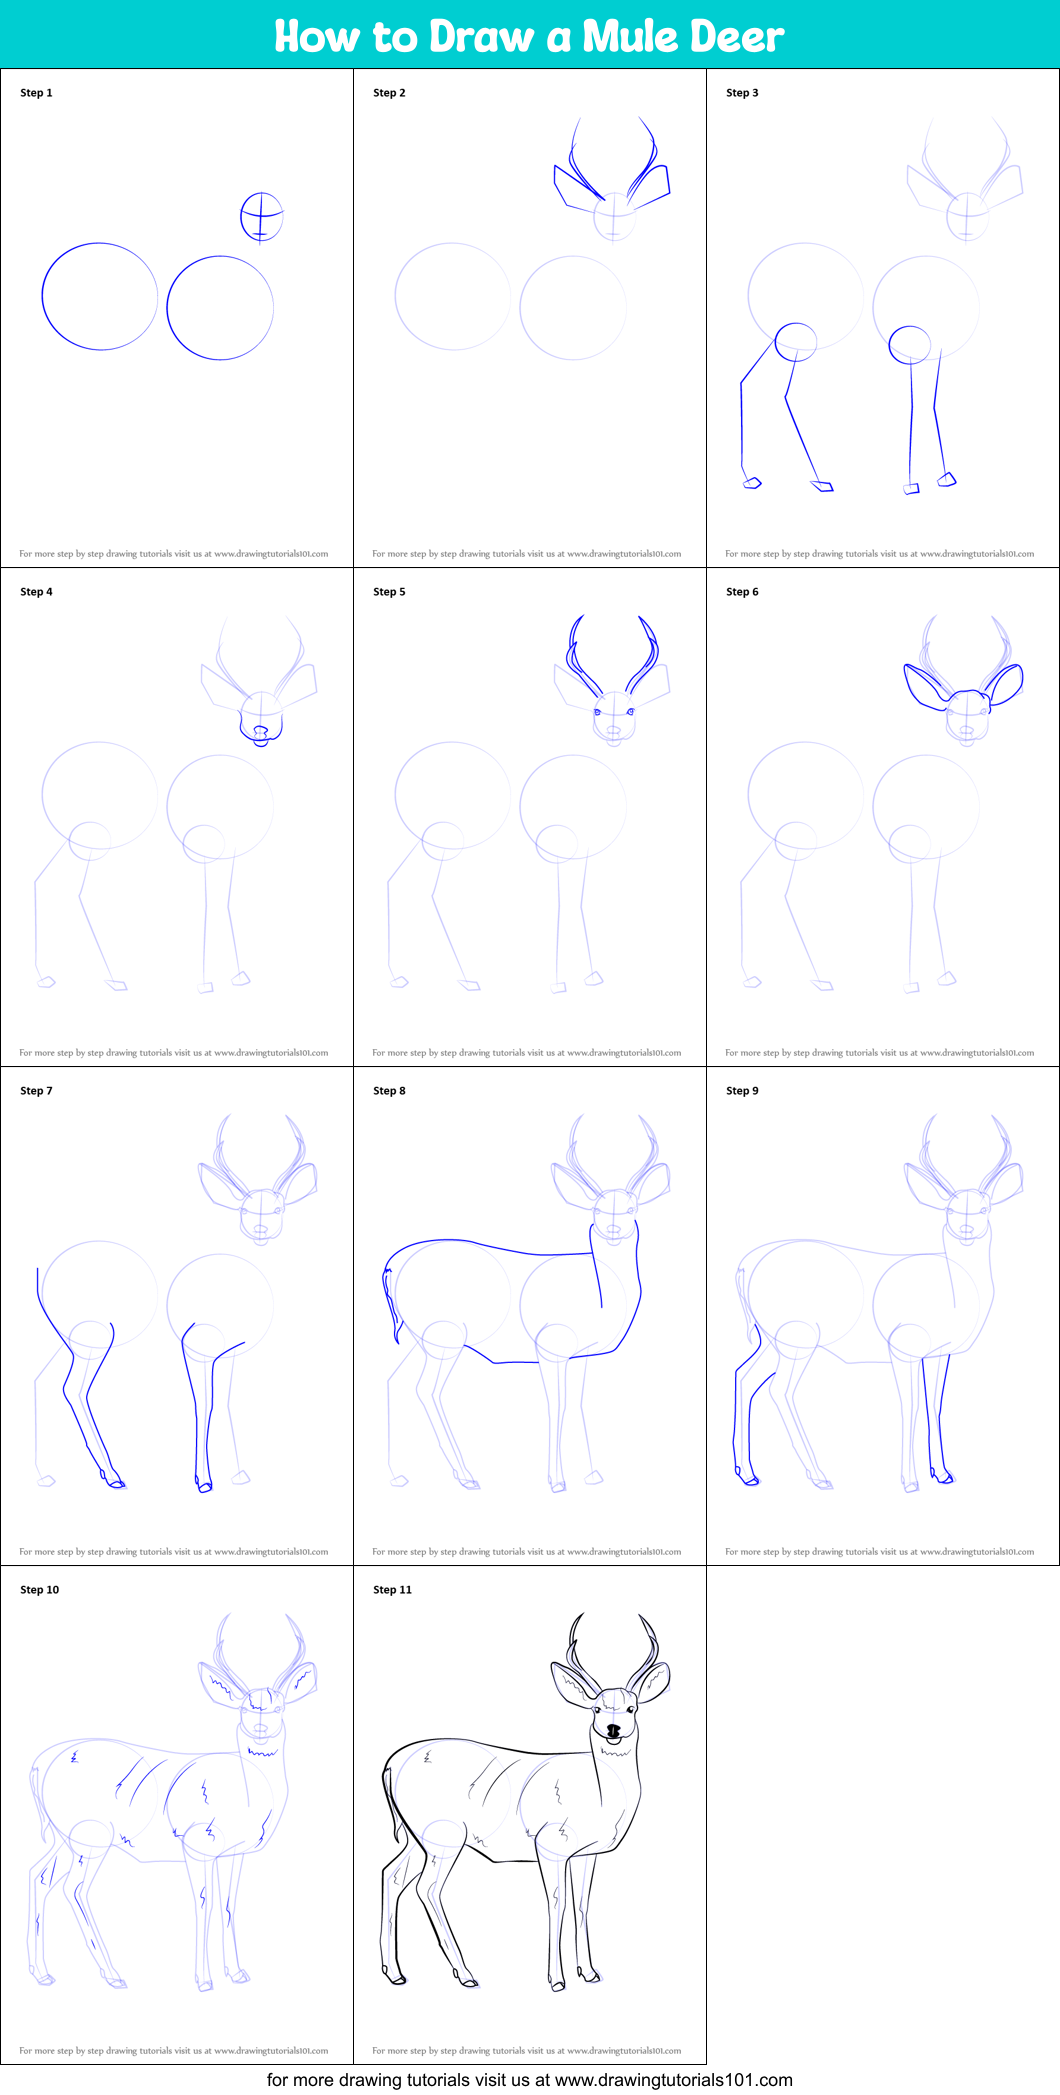 How to Draw a Mule Deer printable step by step drawing sheet